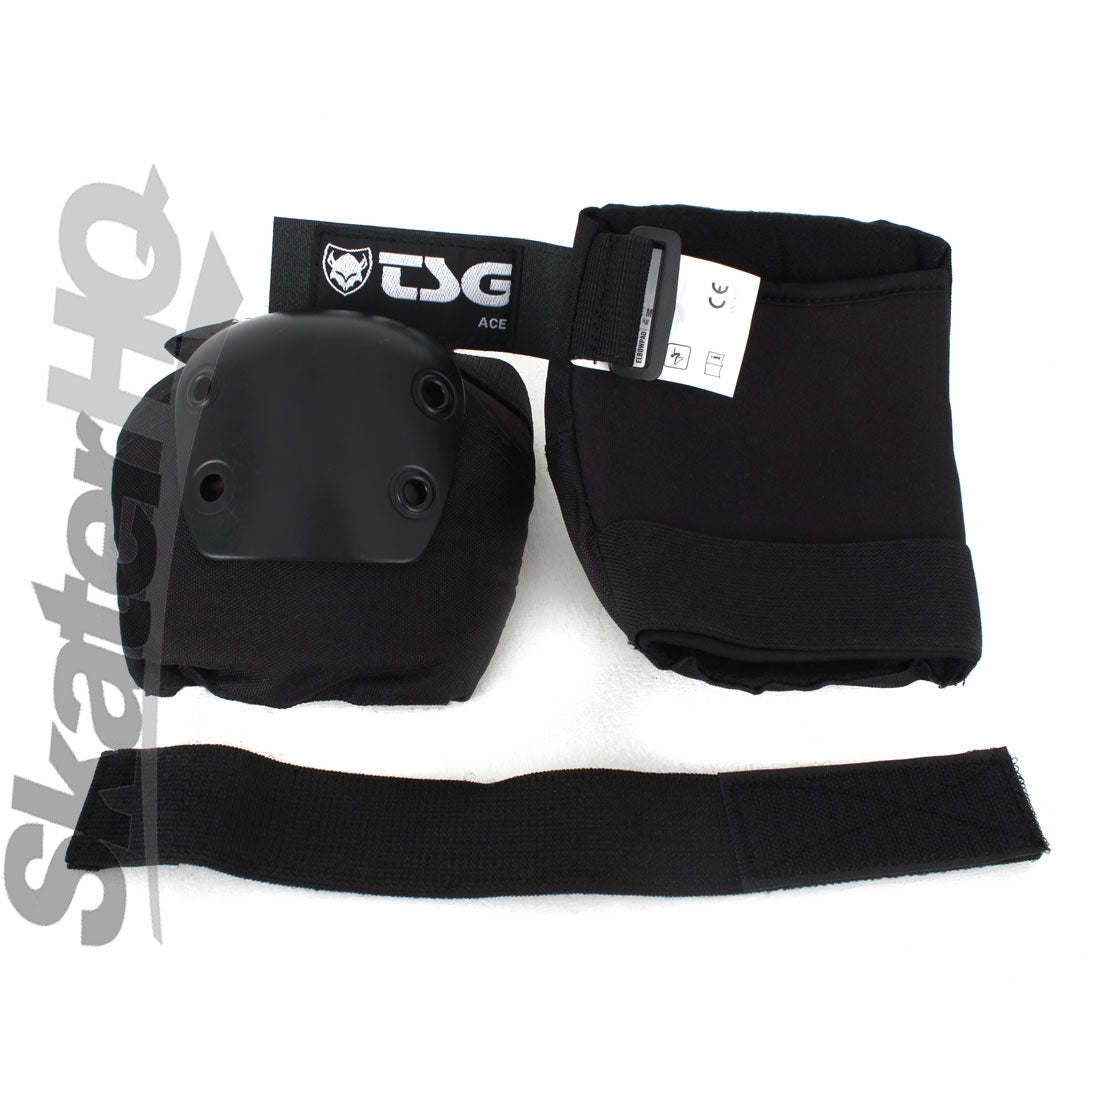 TSG Elbow Ace Pads - Small Protective Gear